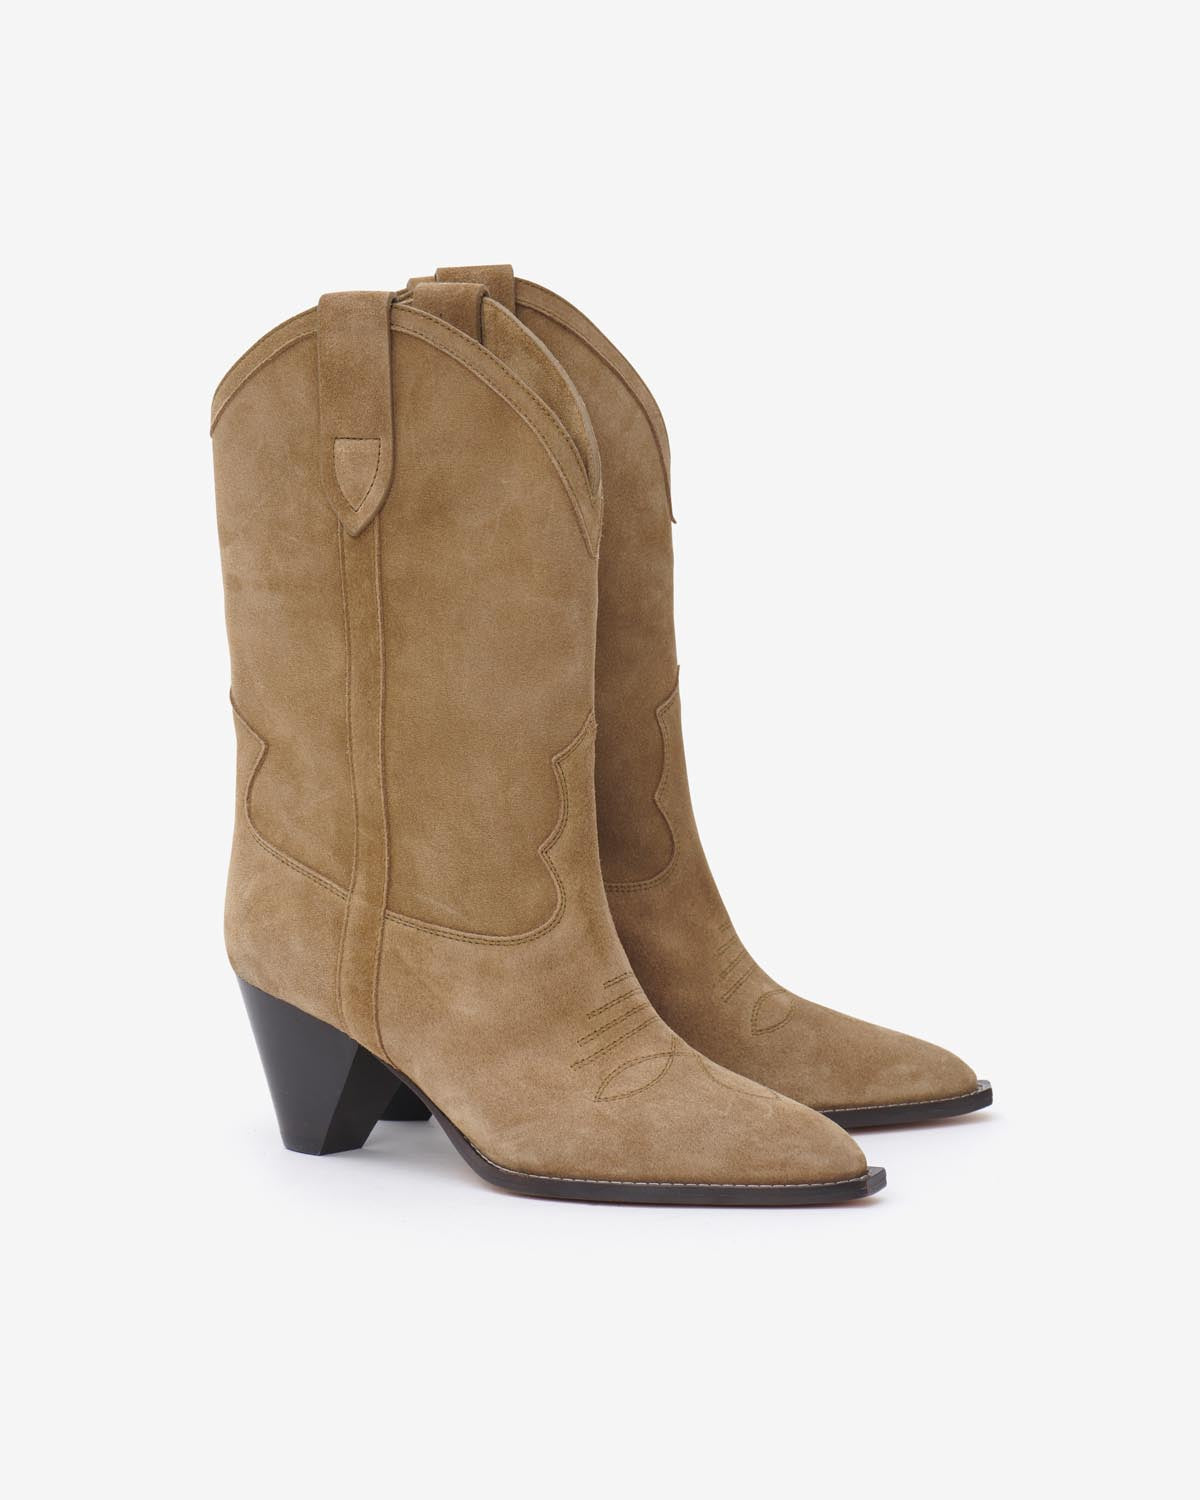 Boots luliette Woman Taupe 4